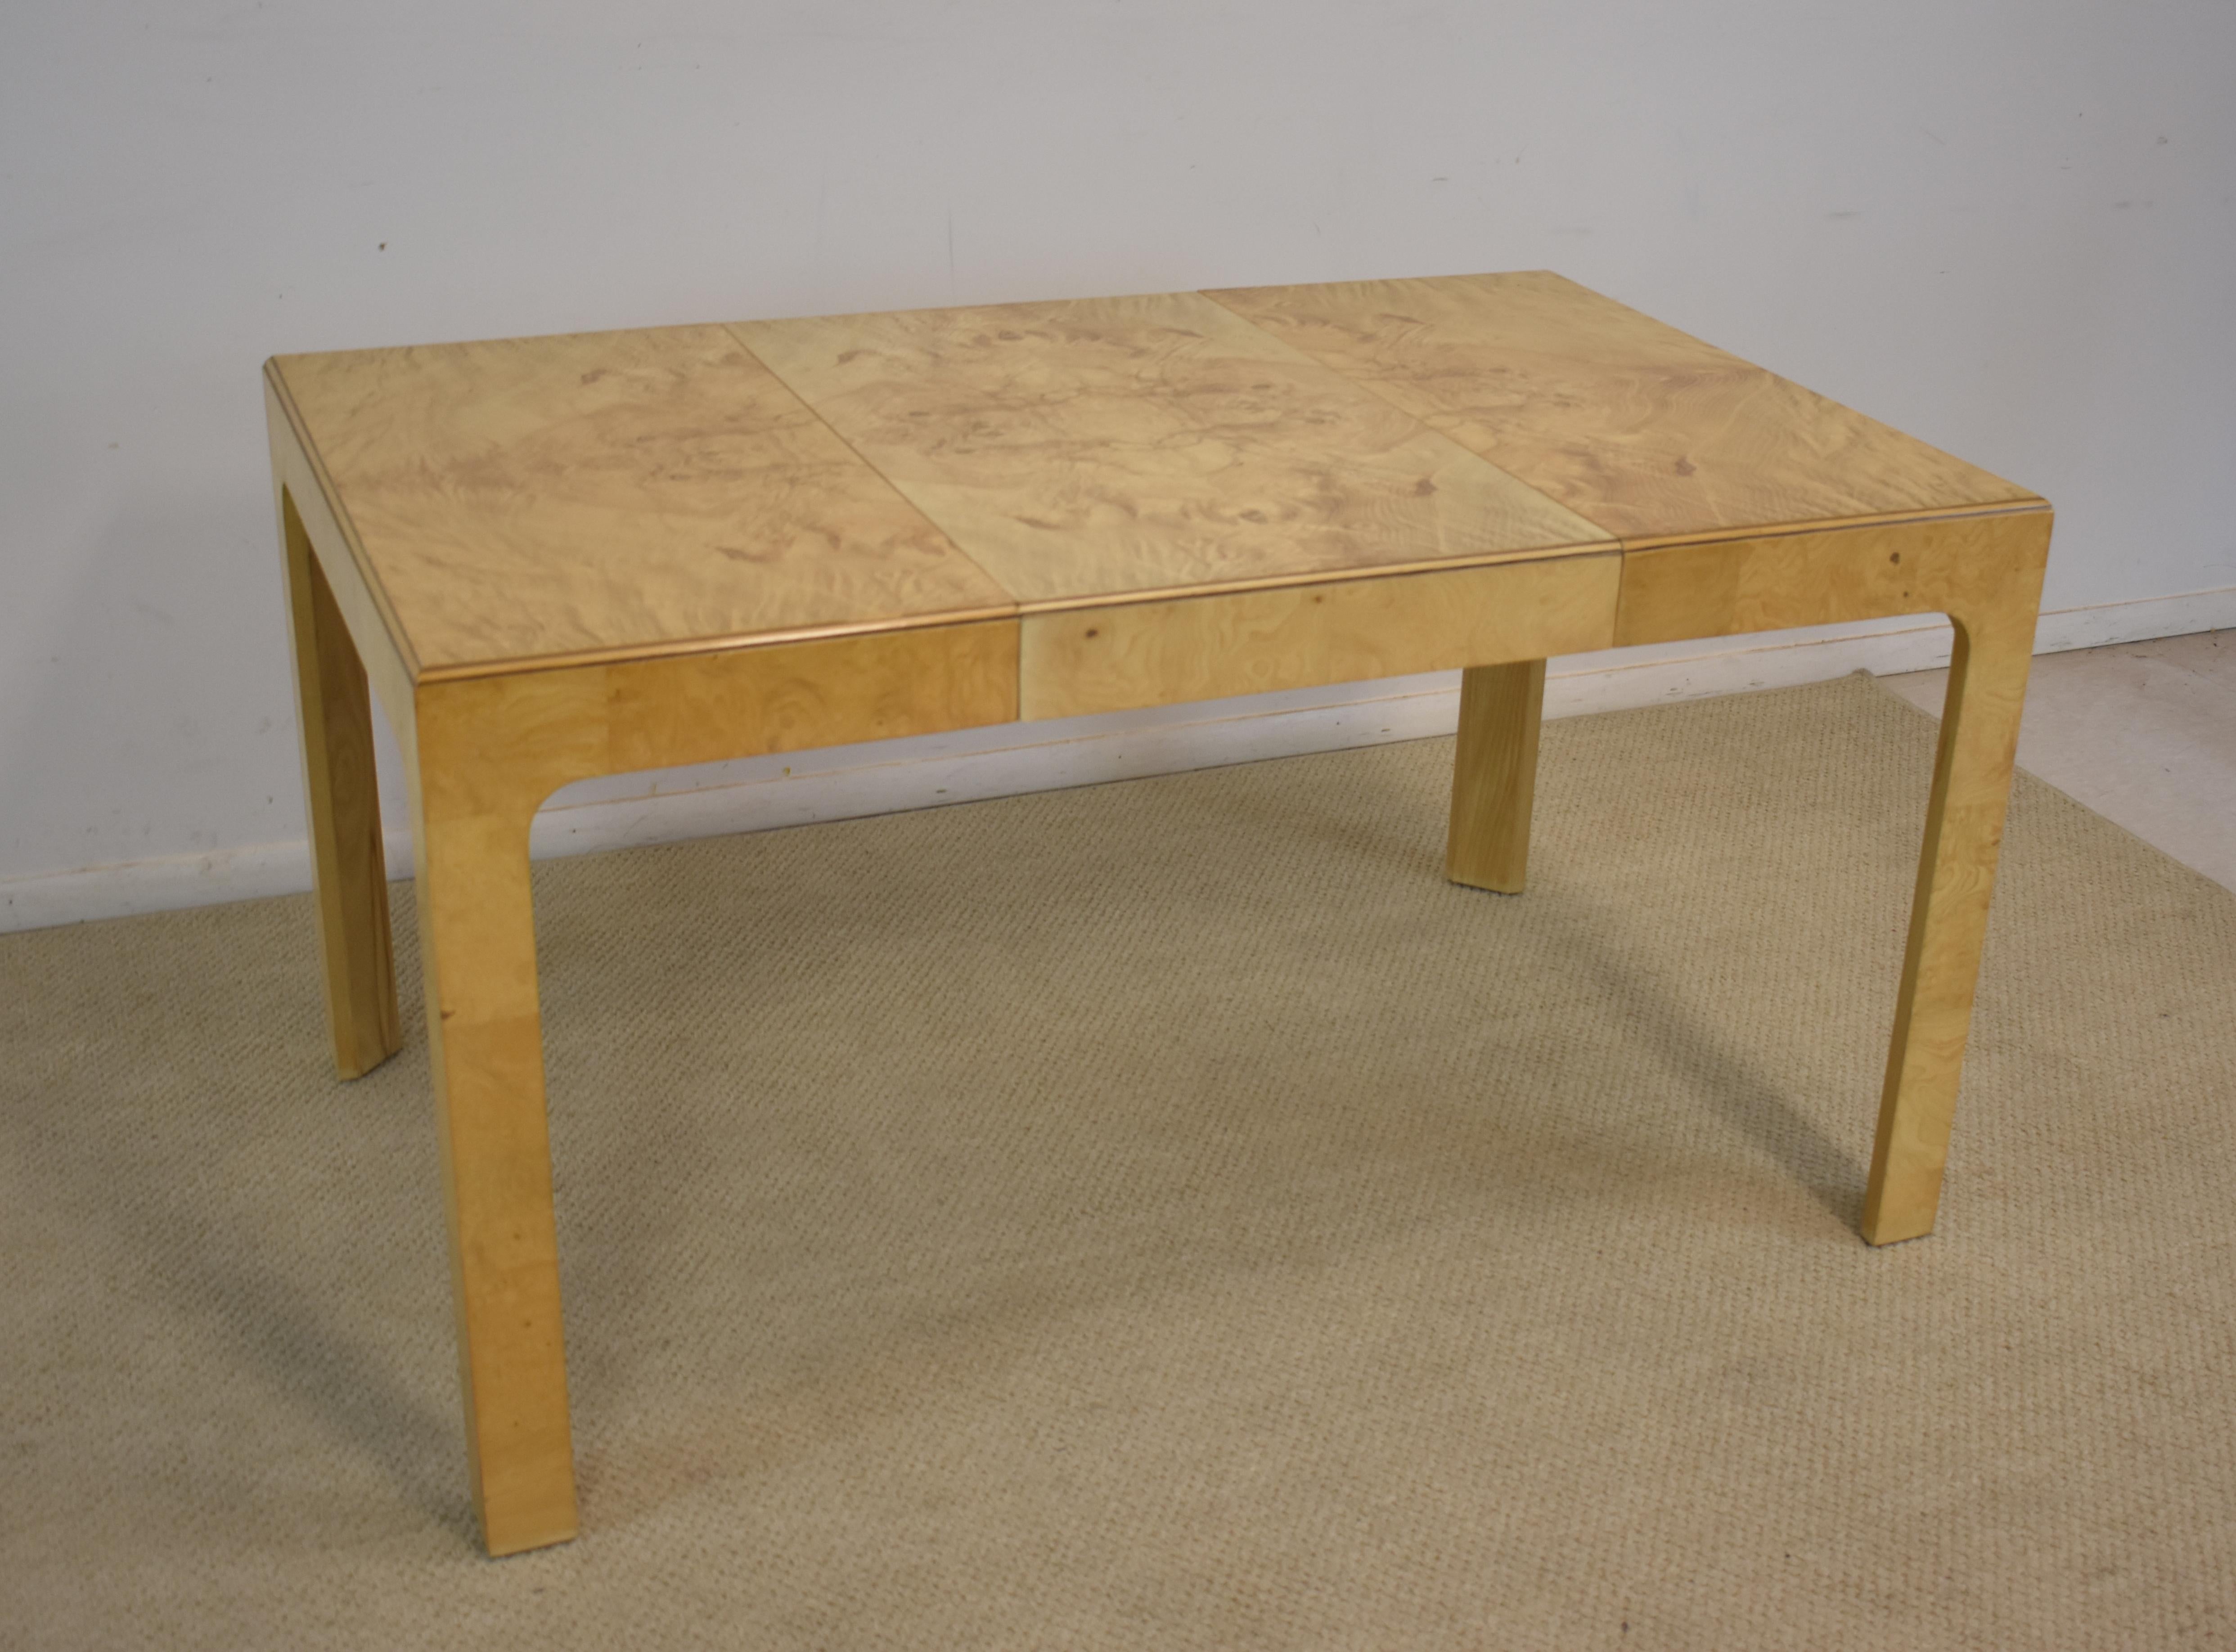 North American Olivewood Game Table Attributed to Henredon Furniture Company